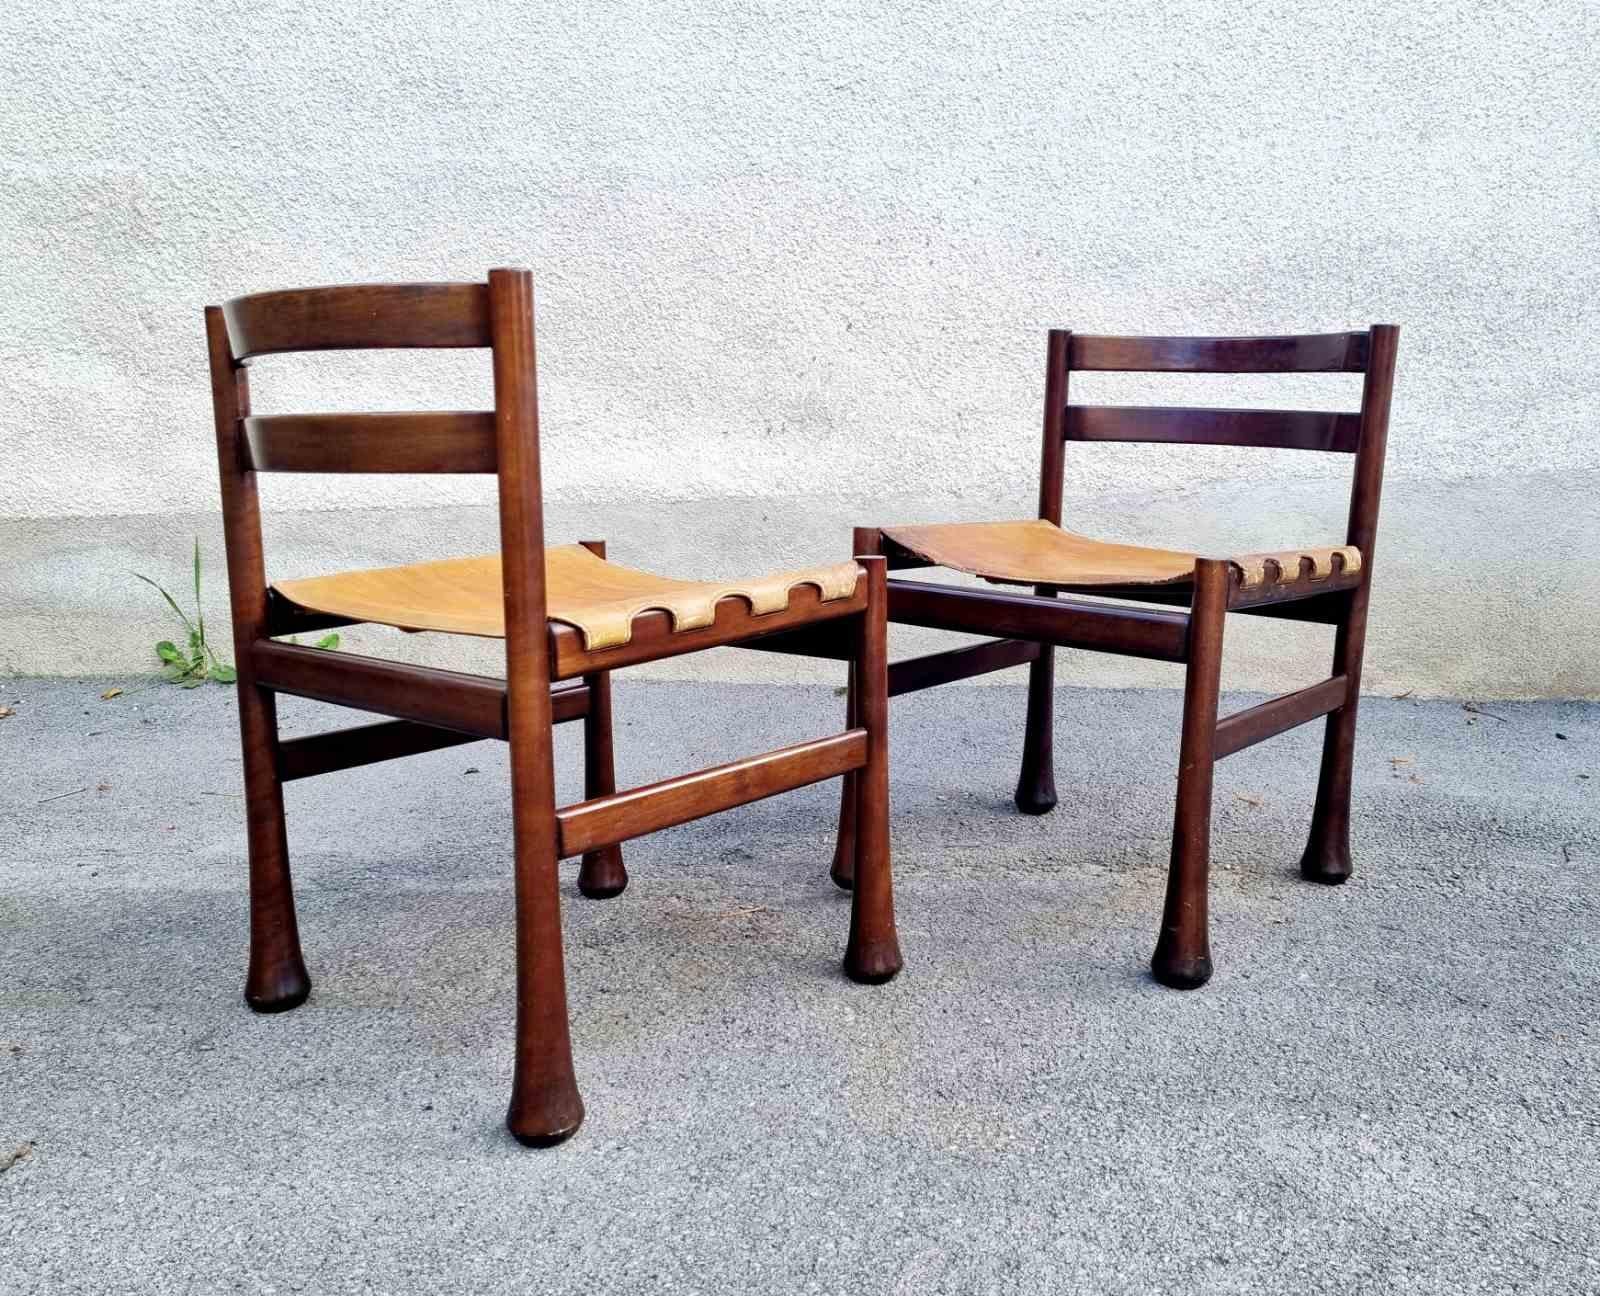 Italian Modern Rosewood and Leather Dining Chairs, Design Luciano Frigerio, 70s For Sale 4